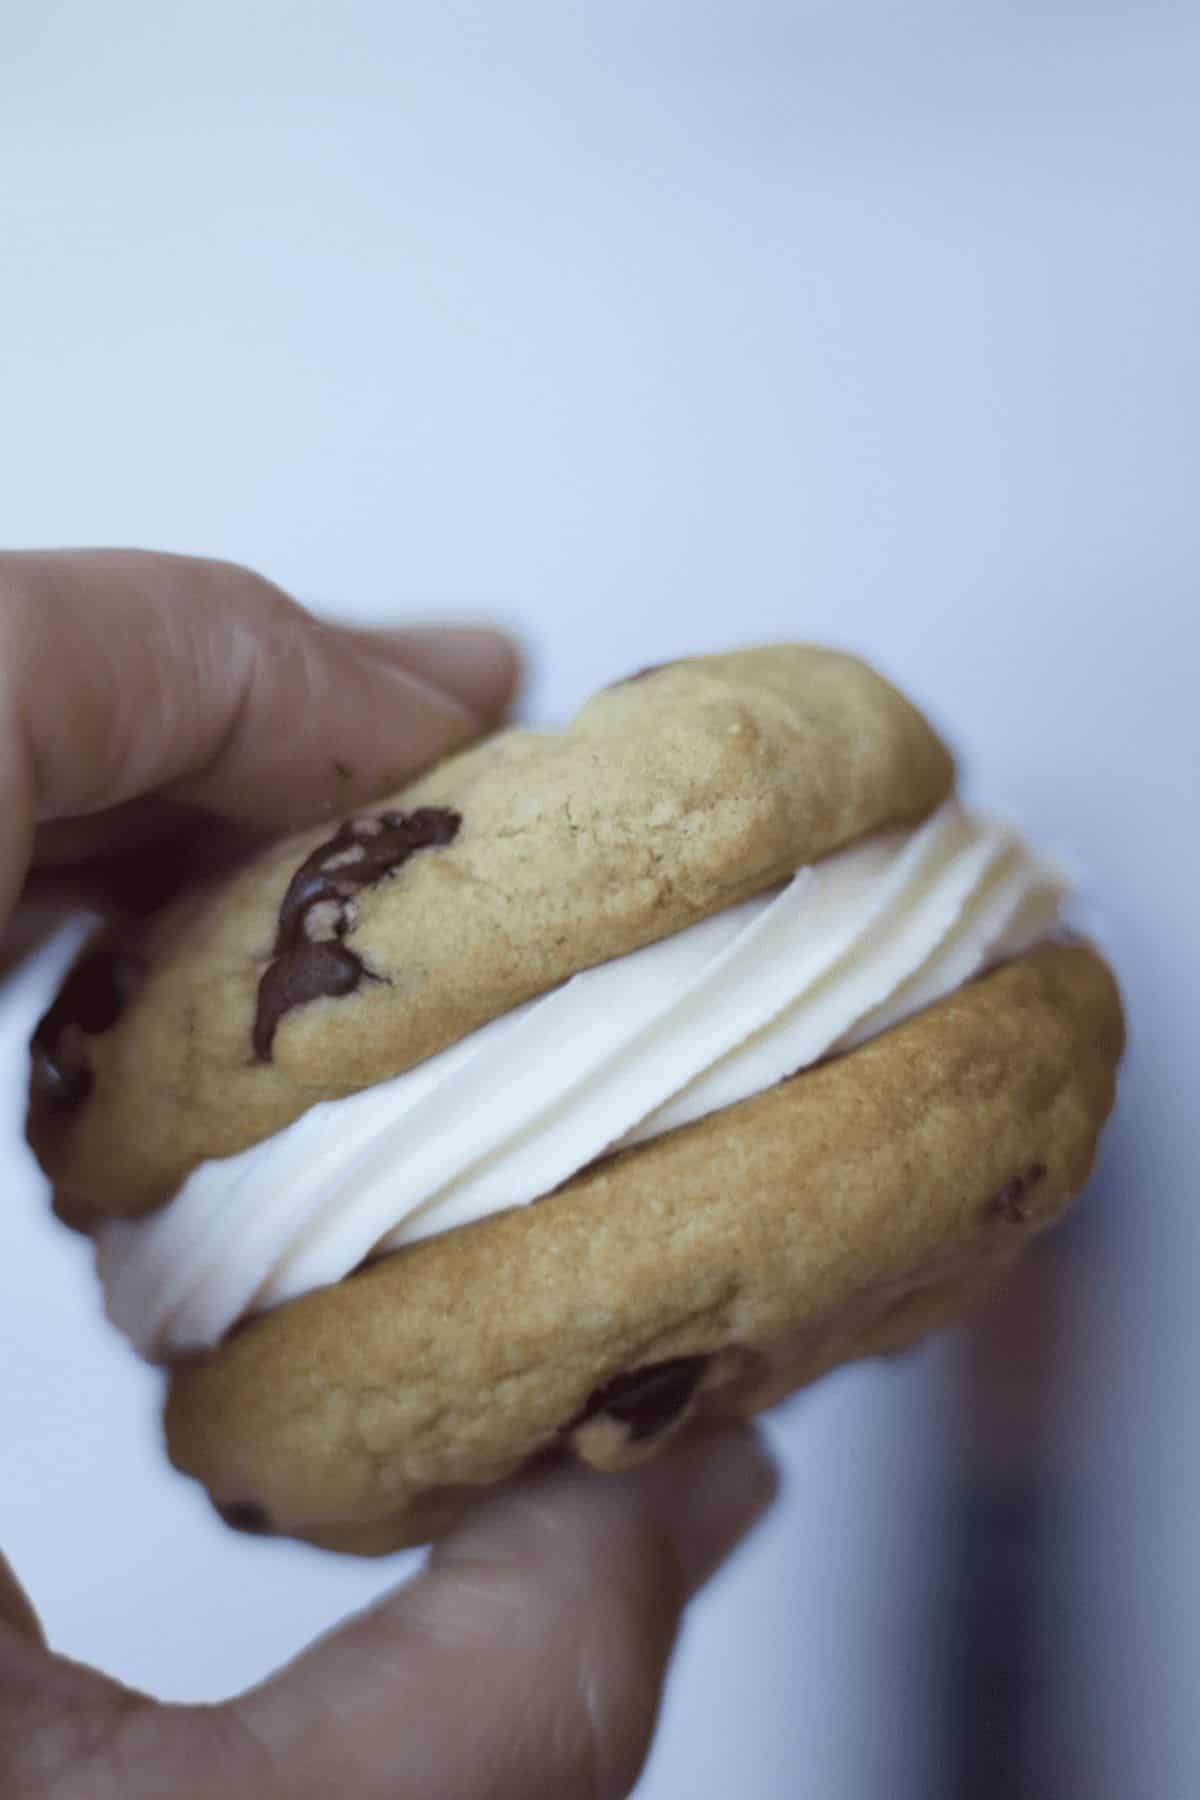 holding a cookie sandwich in a hand